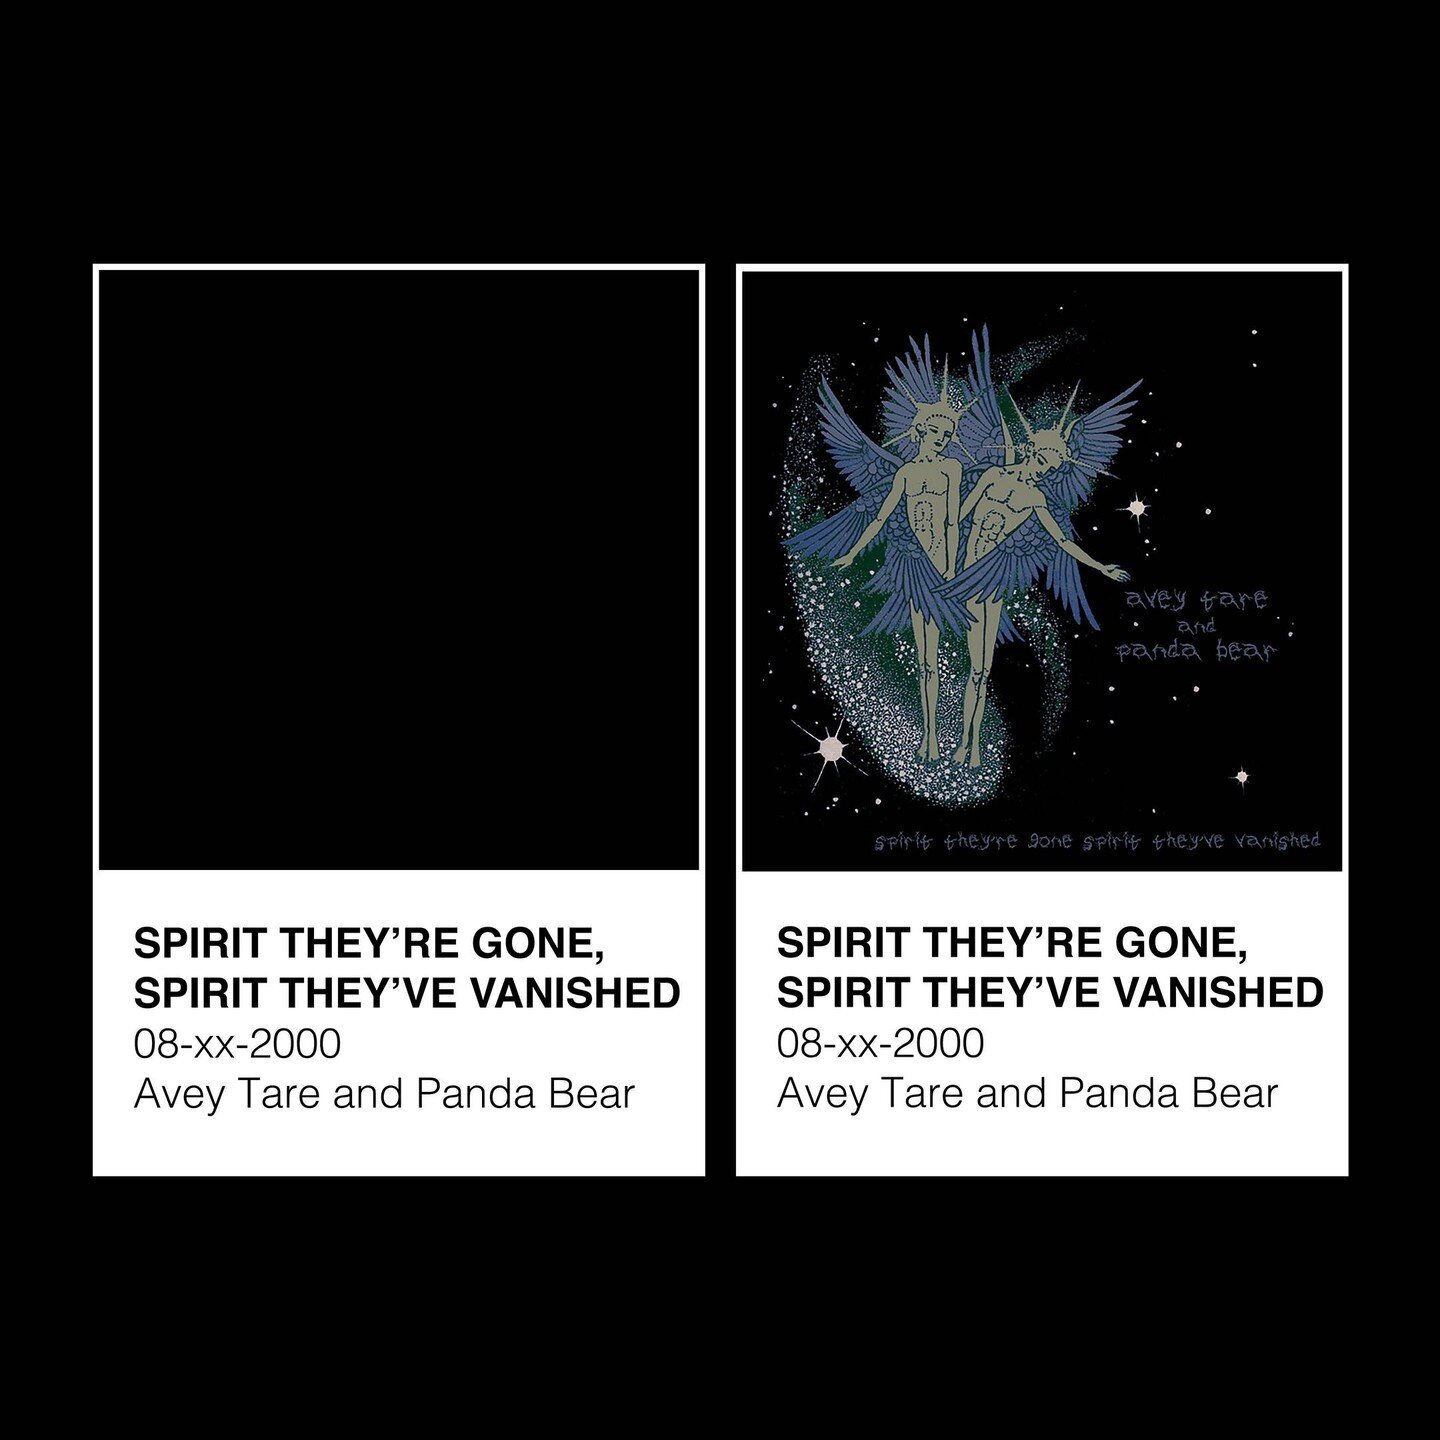 Spirit They're Gone, Spirit They've Vanished by Avey Tare &amp; Panda Bear, released August 2000 on Paw Tracks⁠
⁠
Hex: #000000⁠
⁠
#aveytare #pandabear #animalcollective #spirittheyregone #spirittheyvevanished #albumart #albumcover #pantone